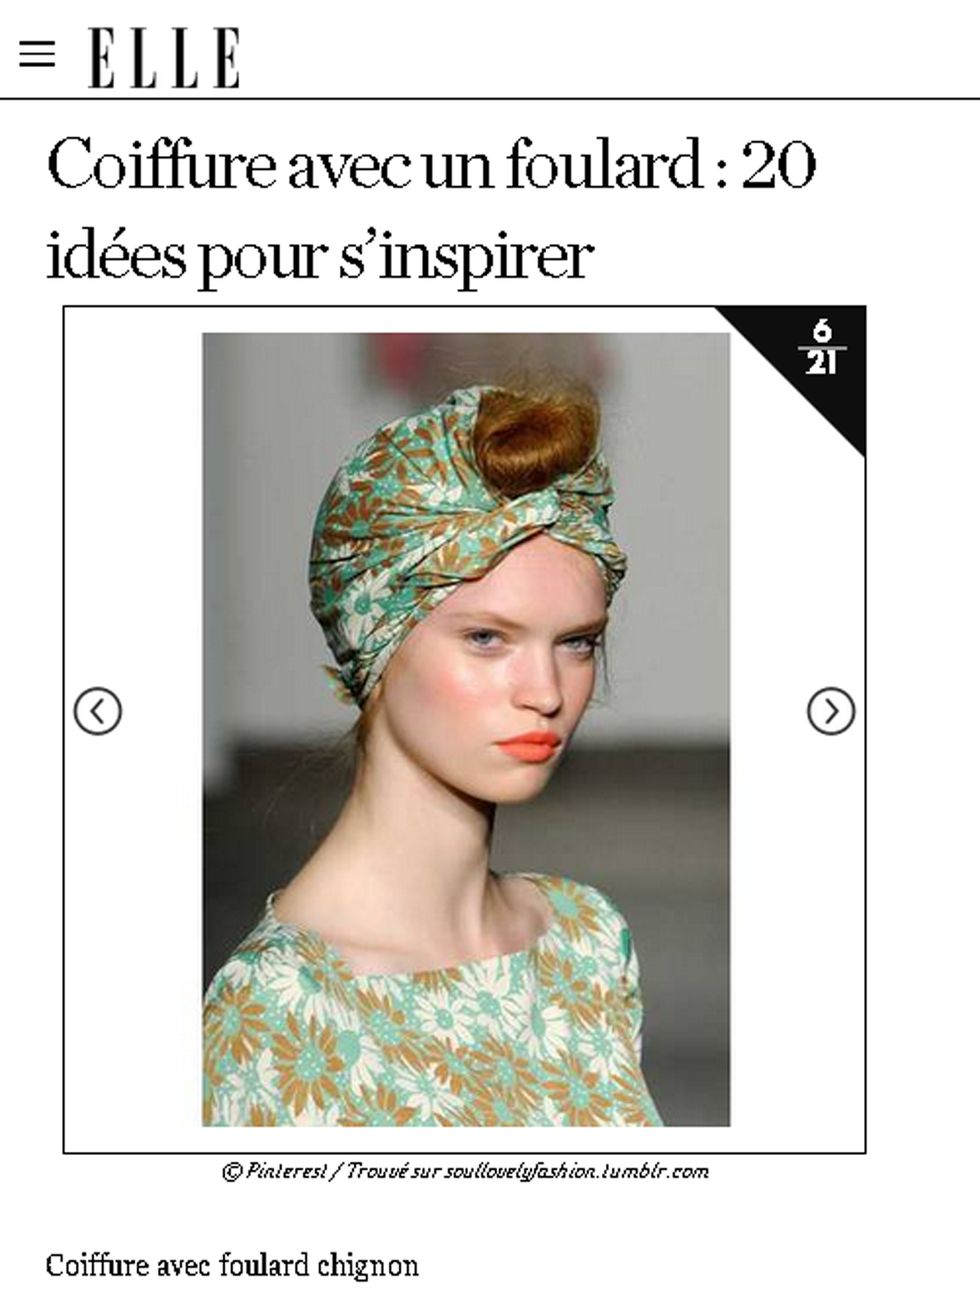 Style, Headgear, Teal, Organ, Hair accessory, Headpiece, Pattern, Turquoise, Makeover, Fashion design, 